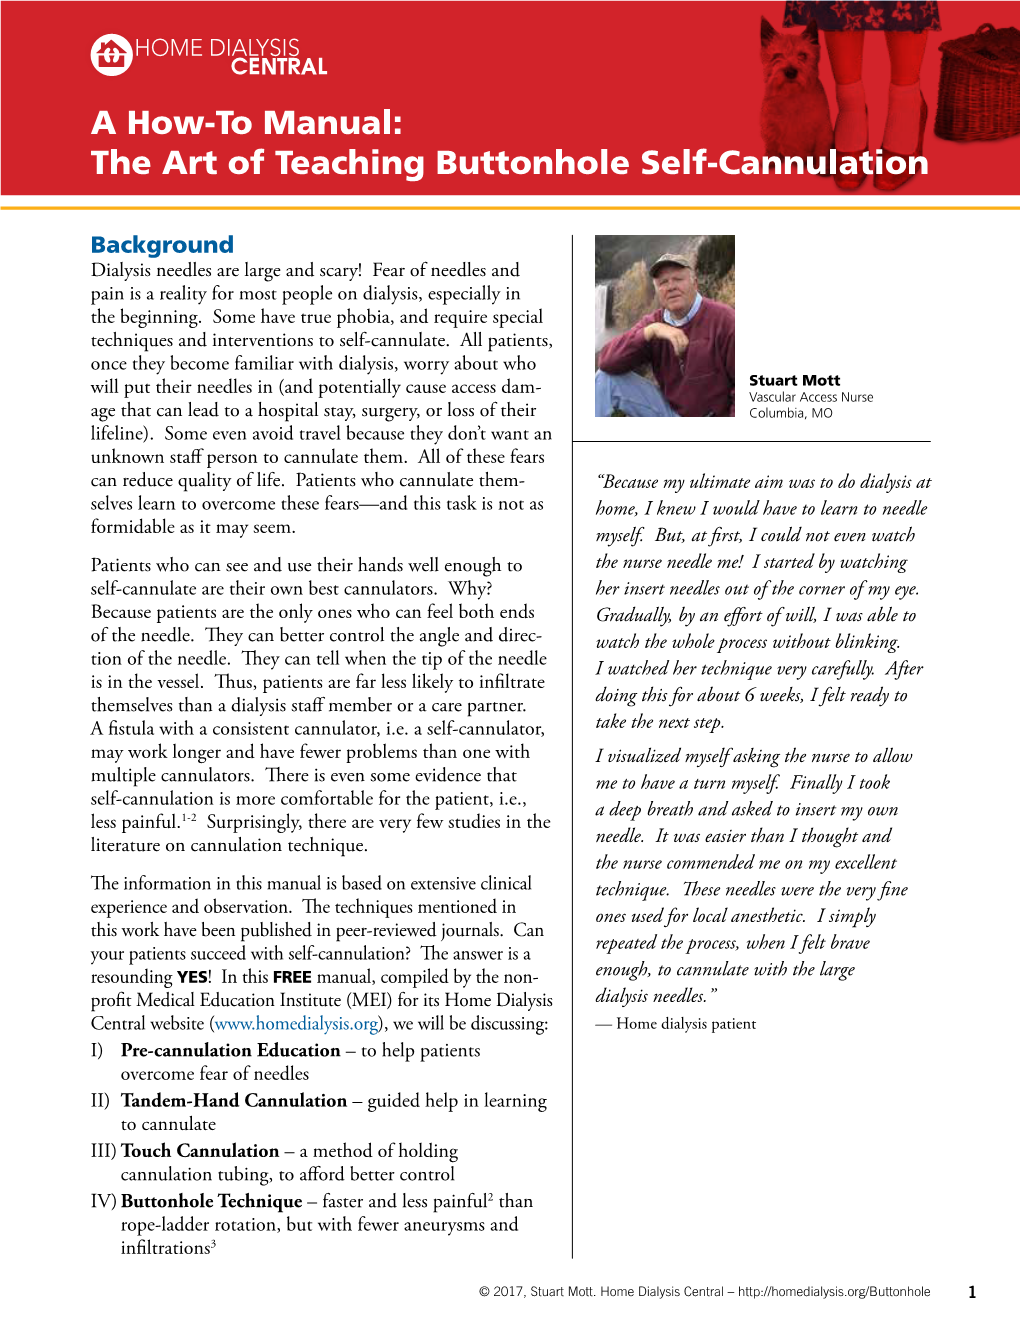 The Art of Teaching Buttonhole Self-Cannulation